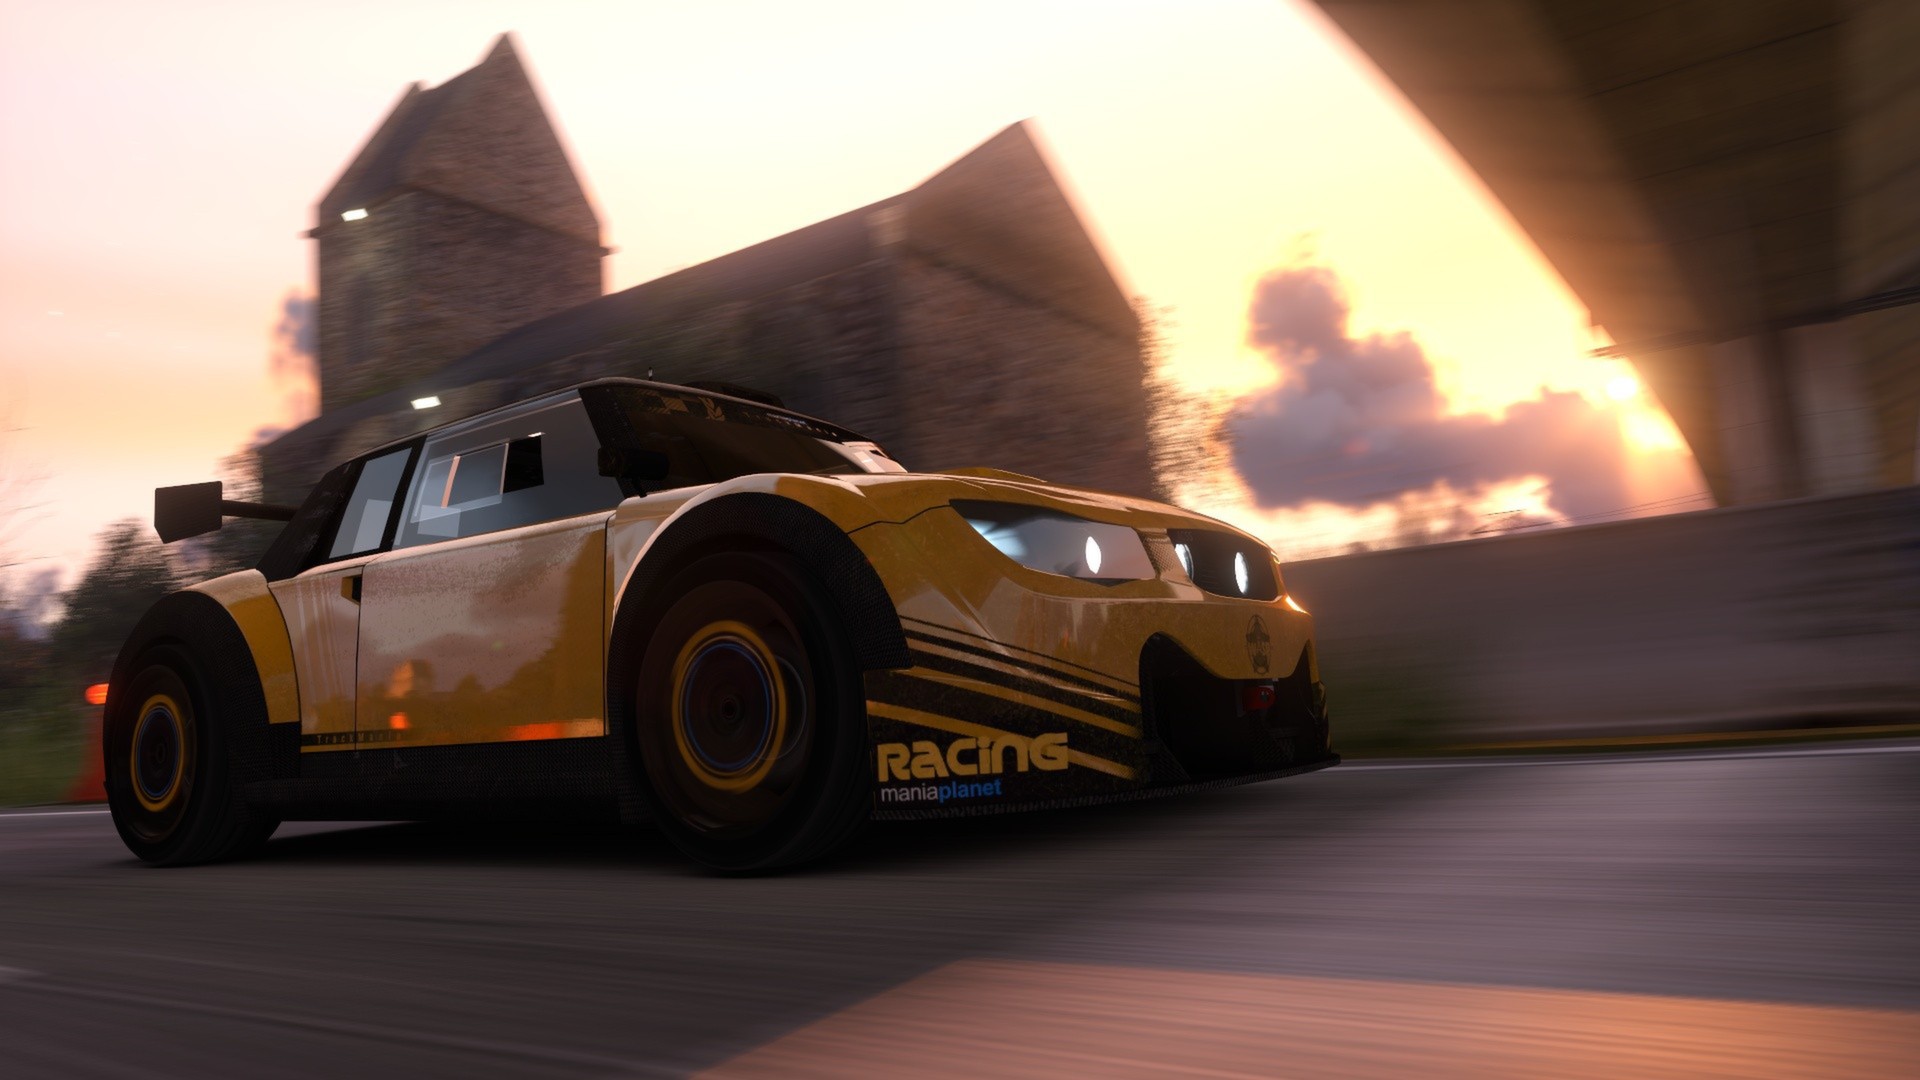 trackmania 2 valley cars